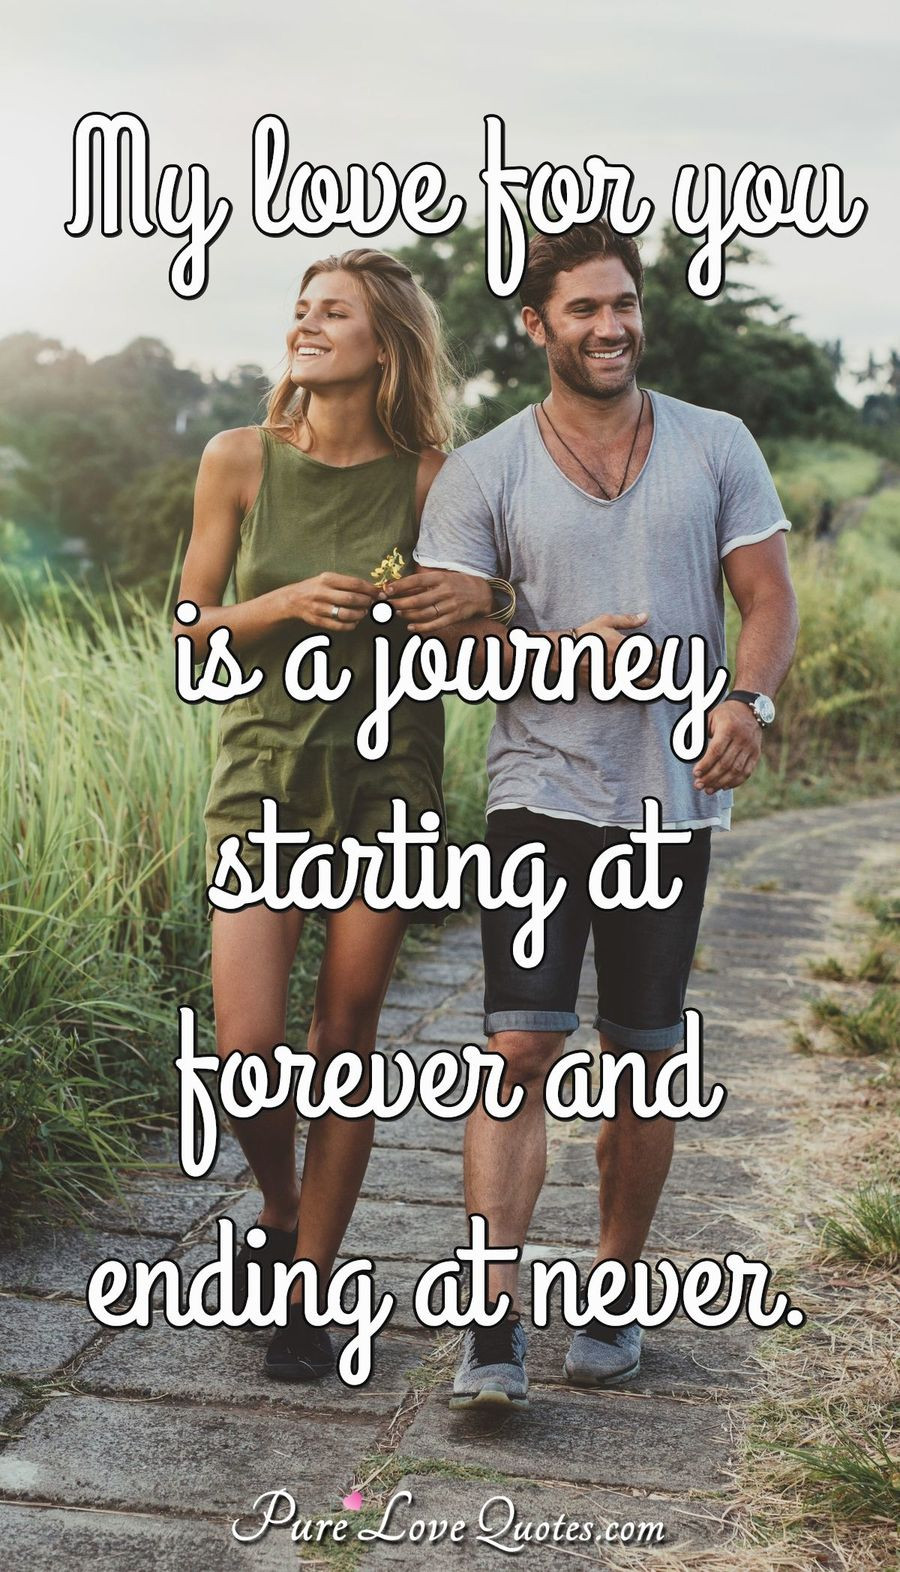 Love Journey Quote
 My love for you is a journey starting at forever and